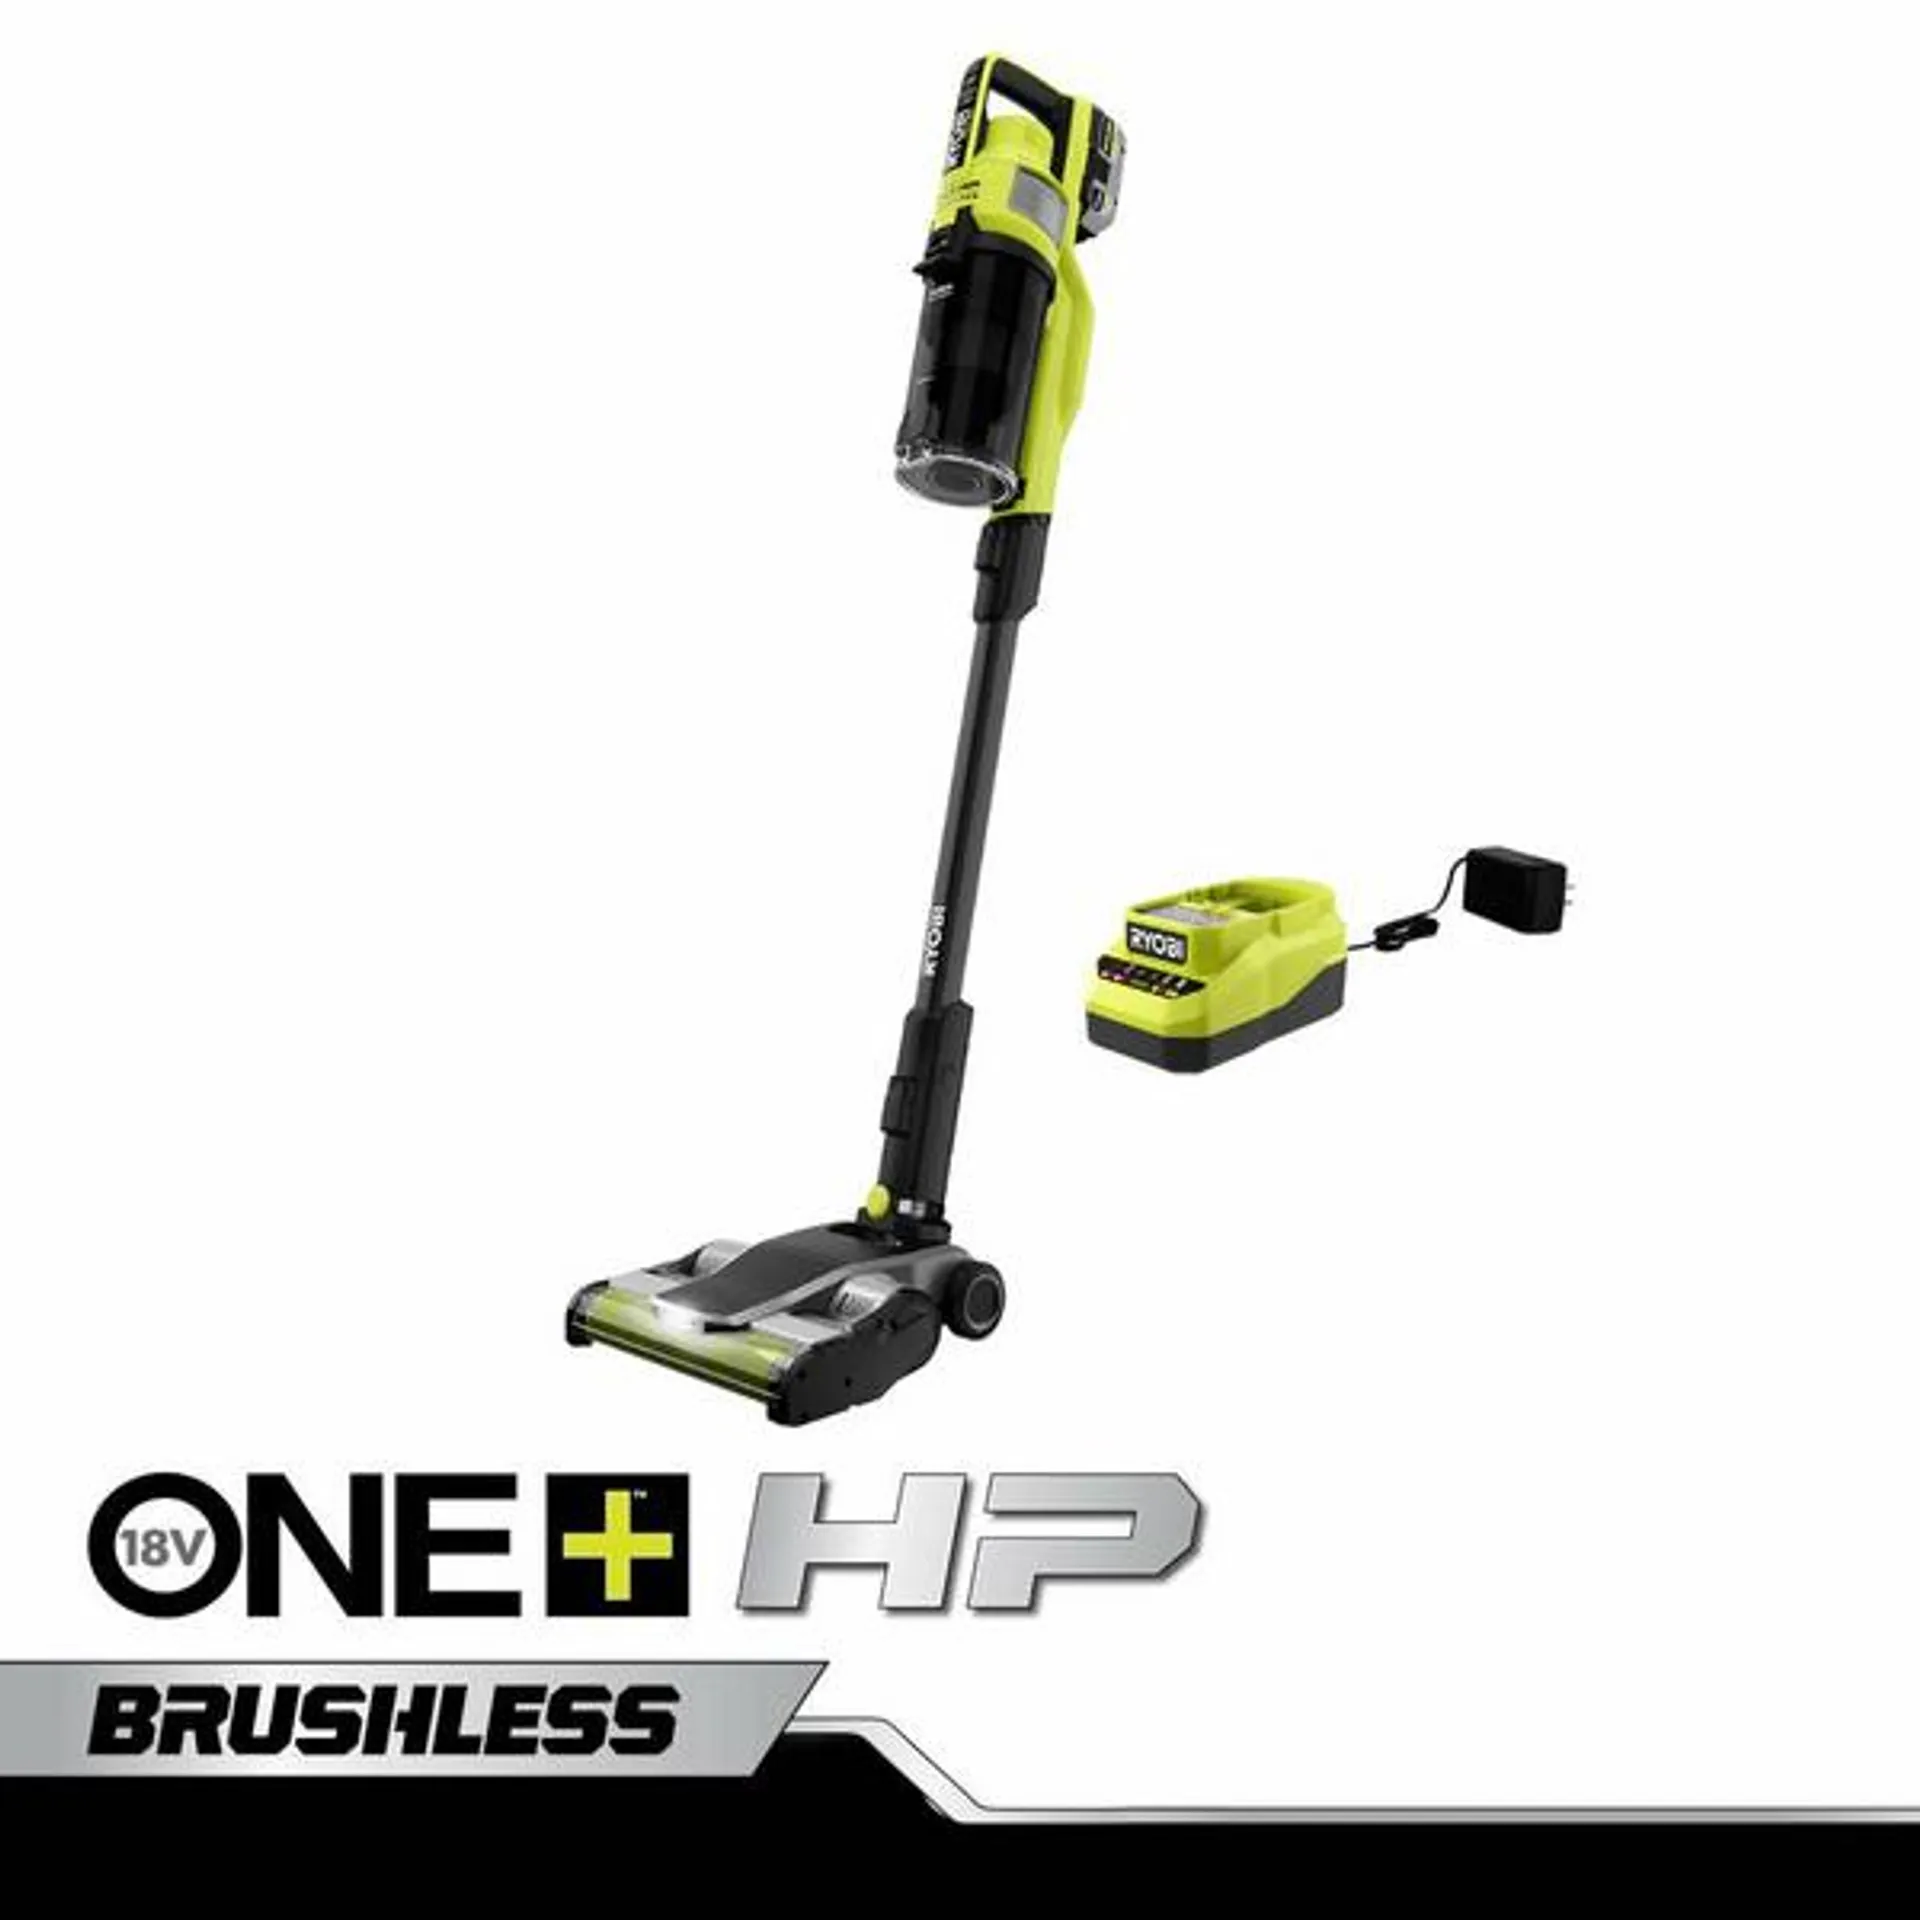 18V ONE+ HP CORDLESS PET STICK VAC KIT WITH DUAL-ROLLER BAR